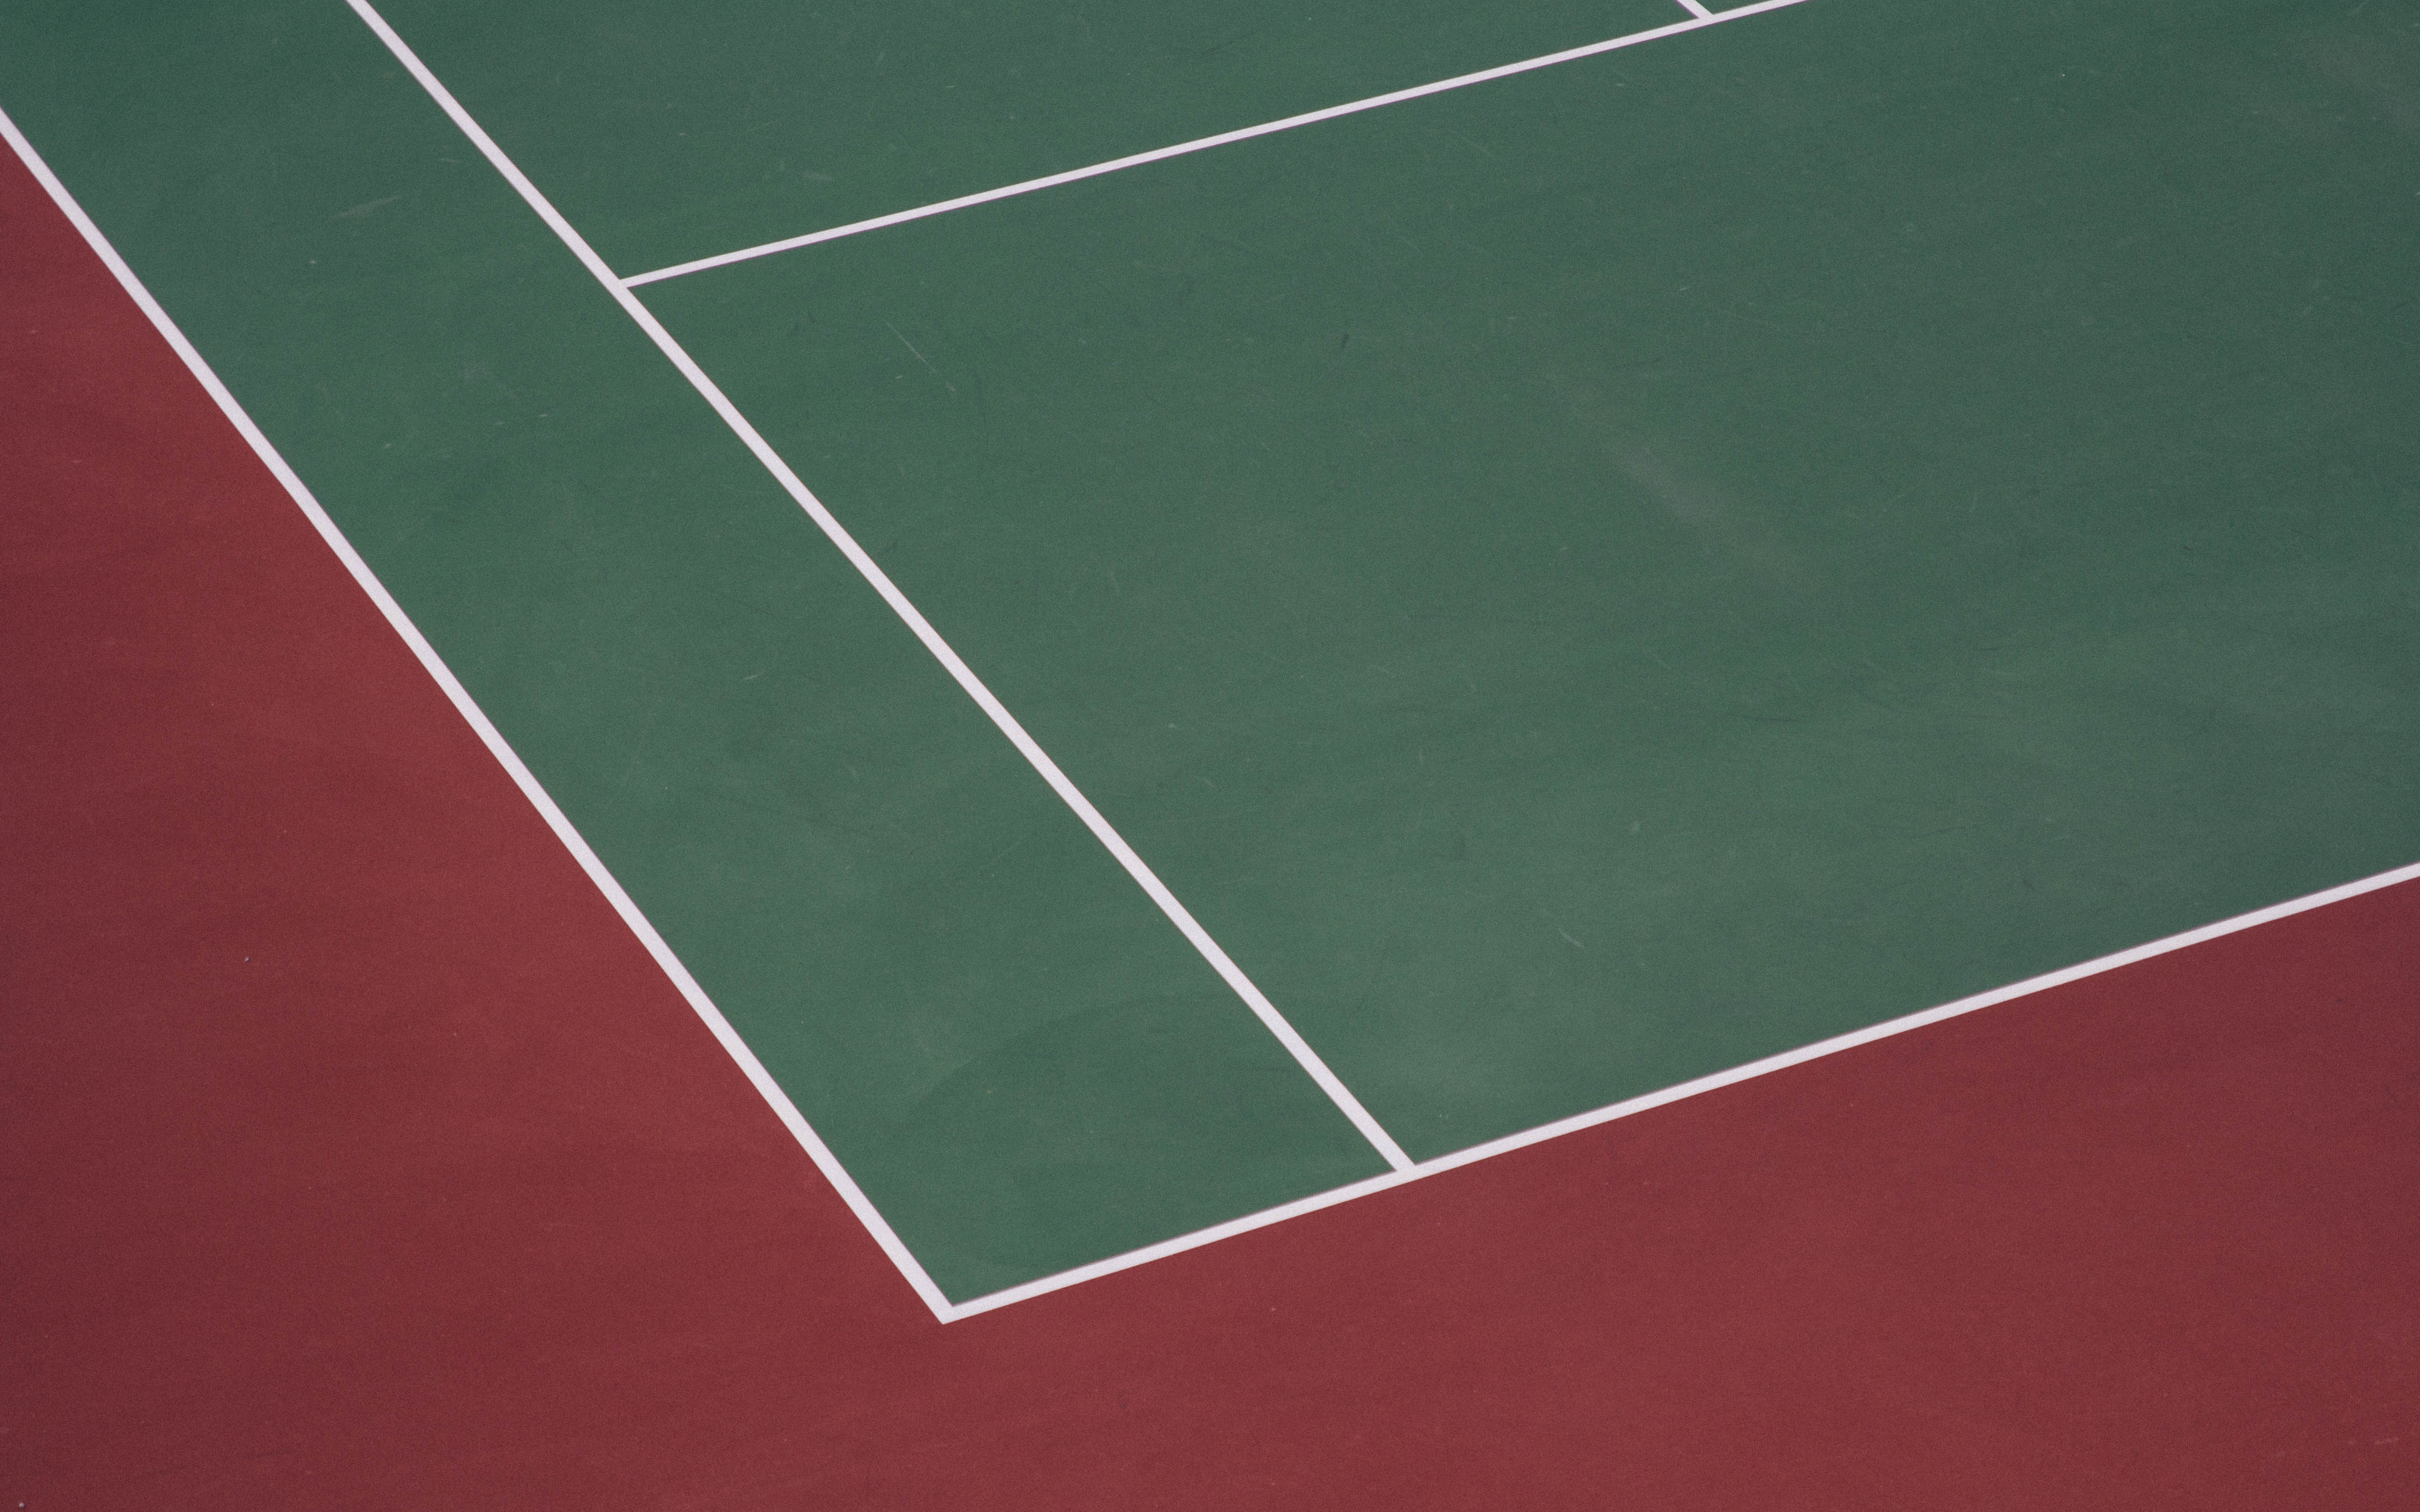 photo of tennis court during daytime